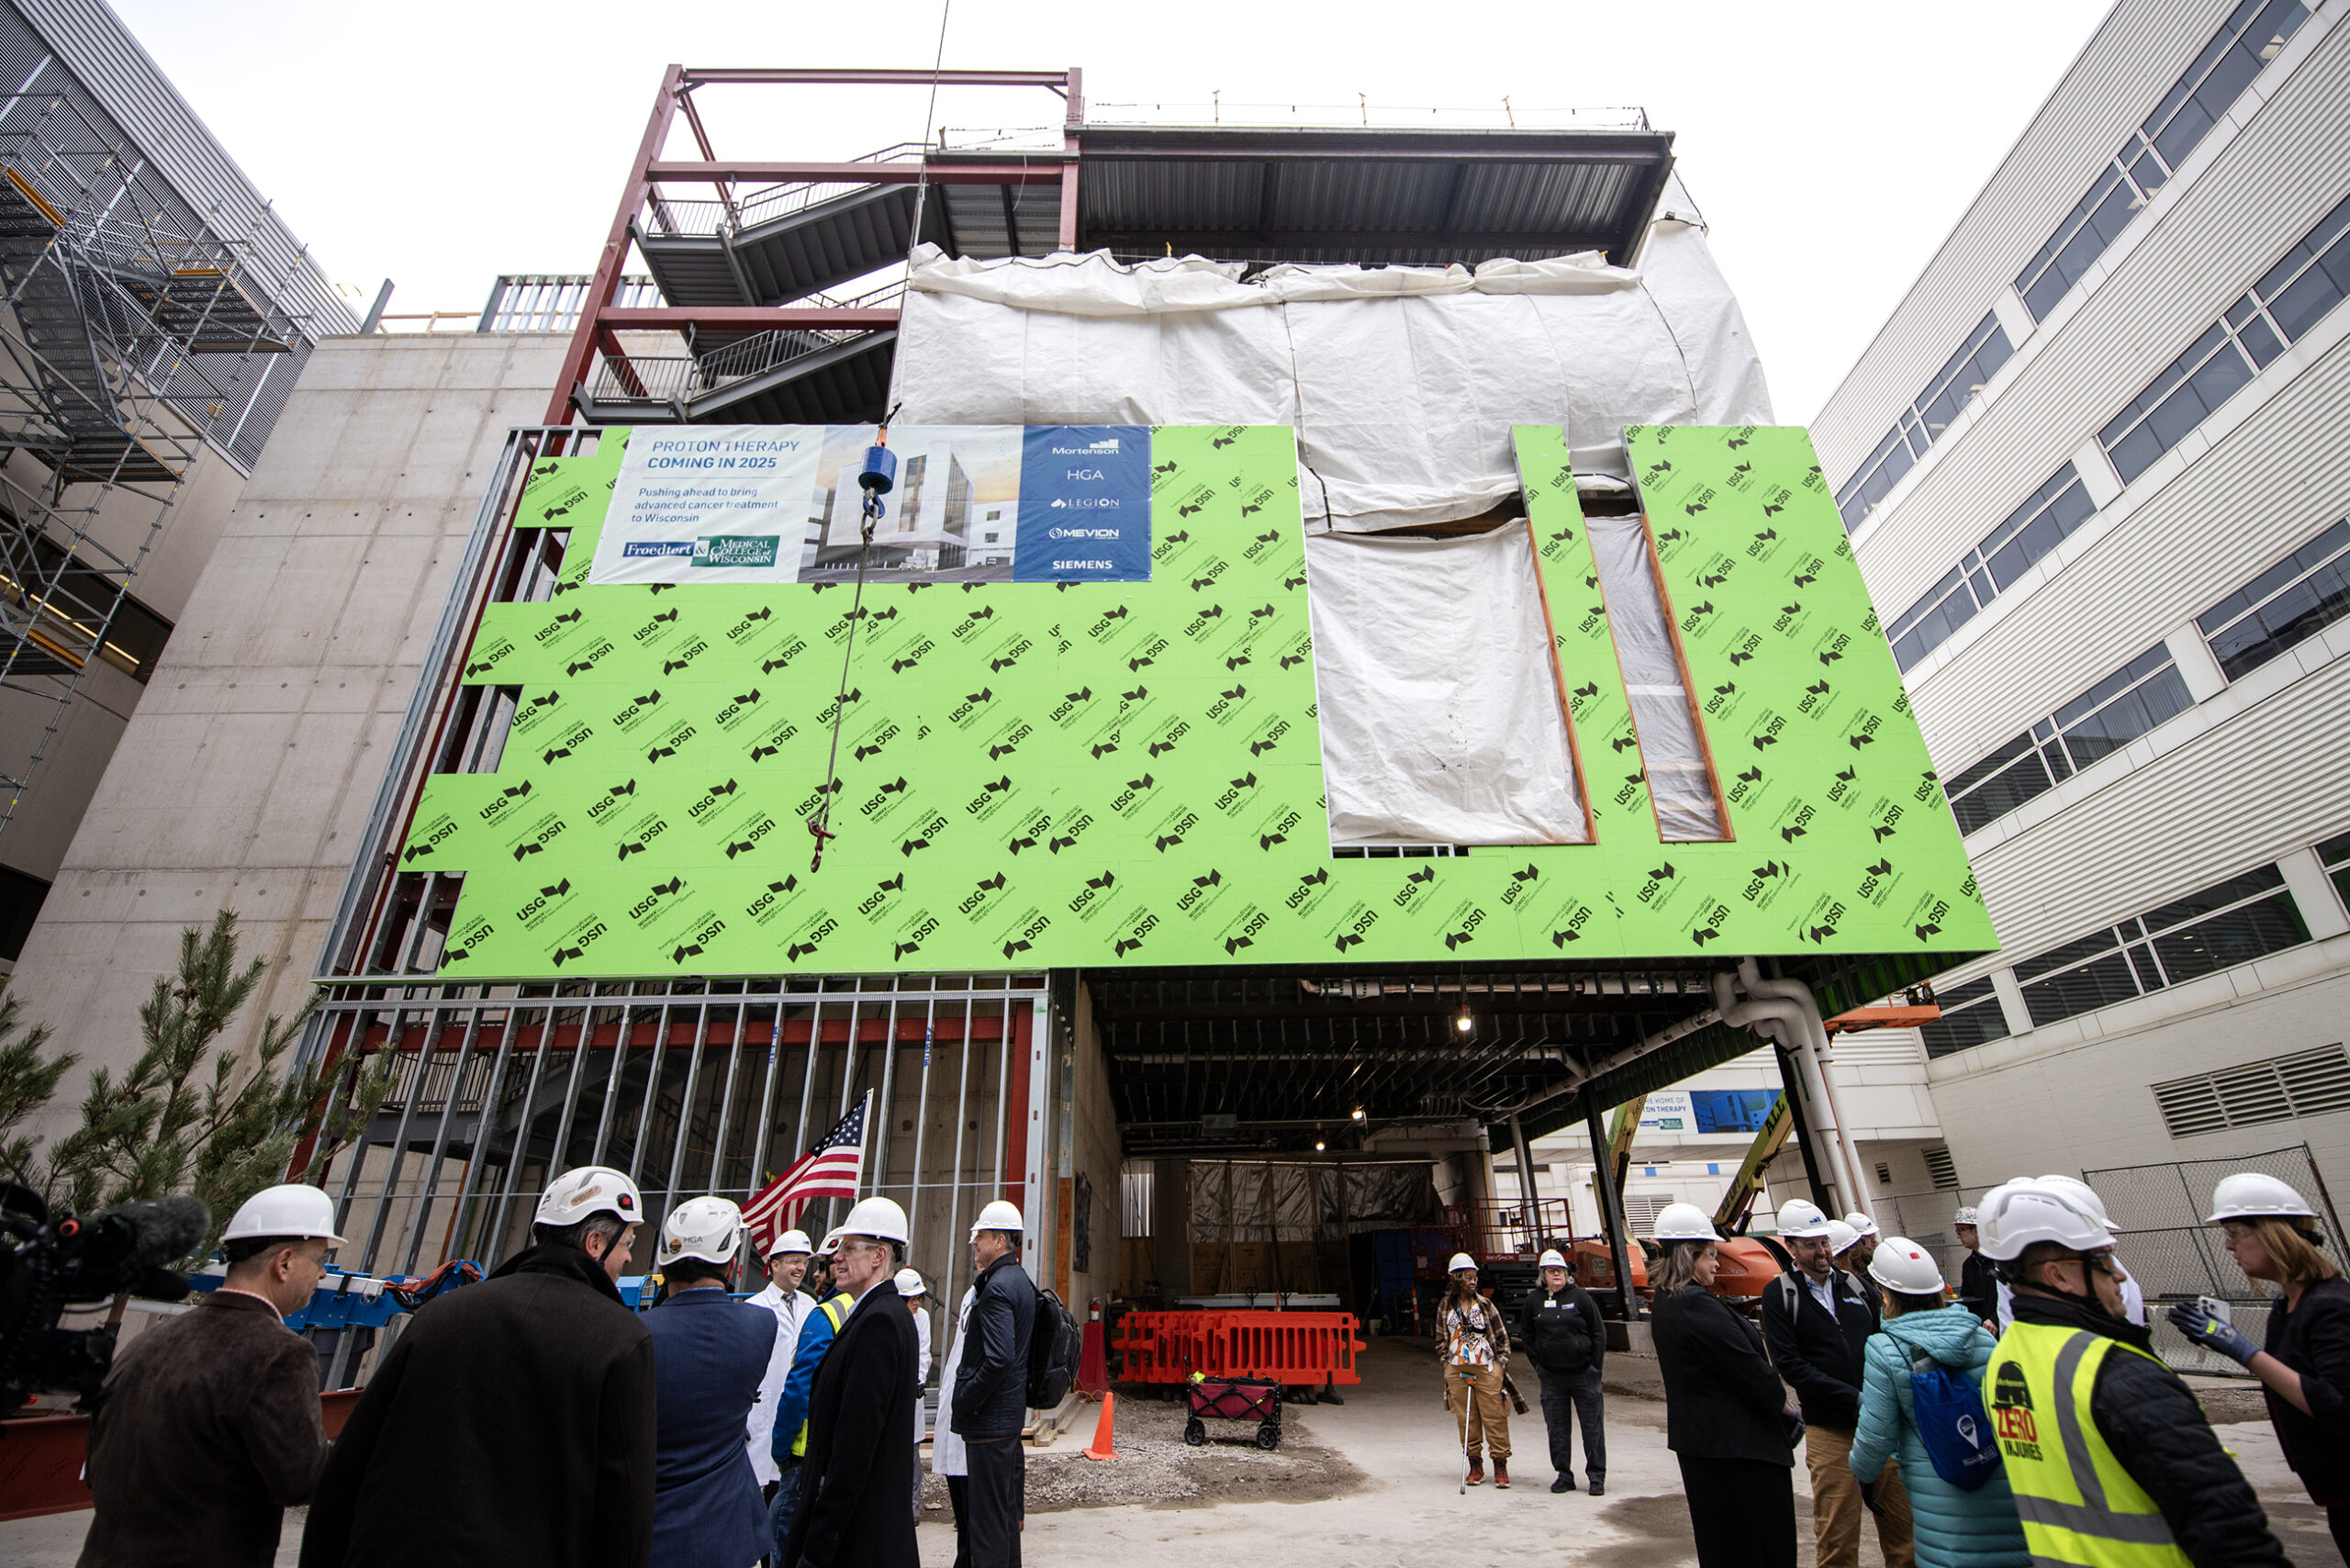 Green material covers the exterior of the building under construction